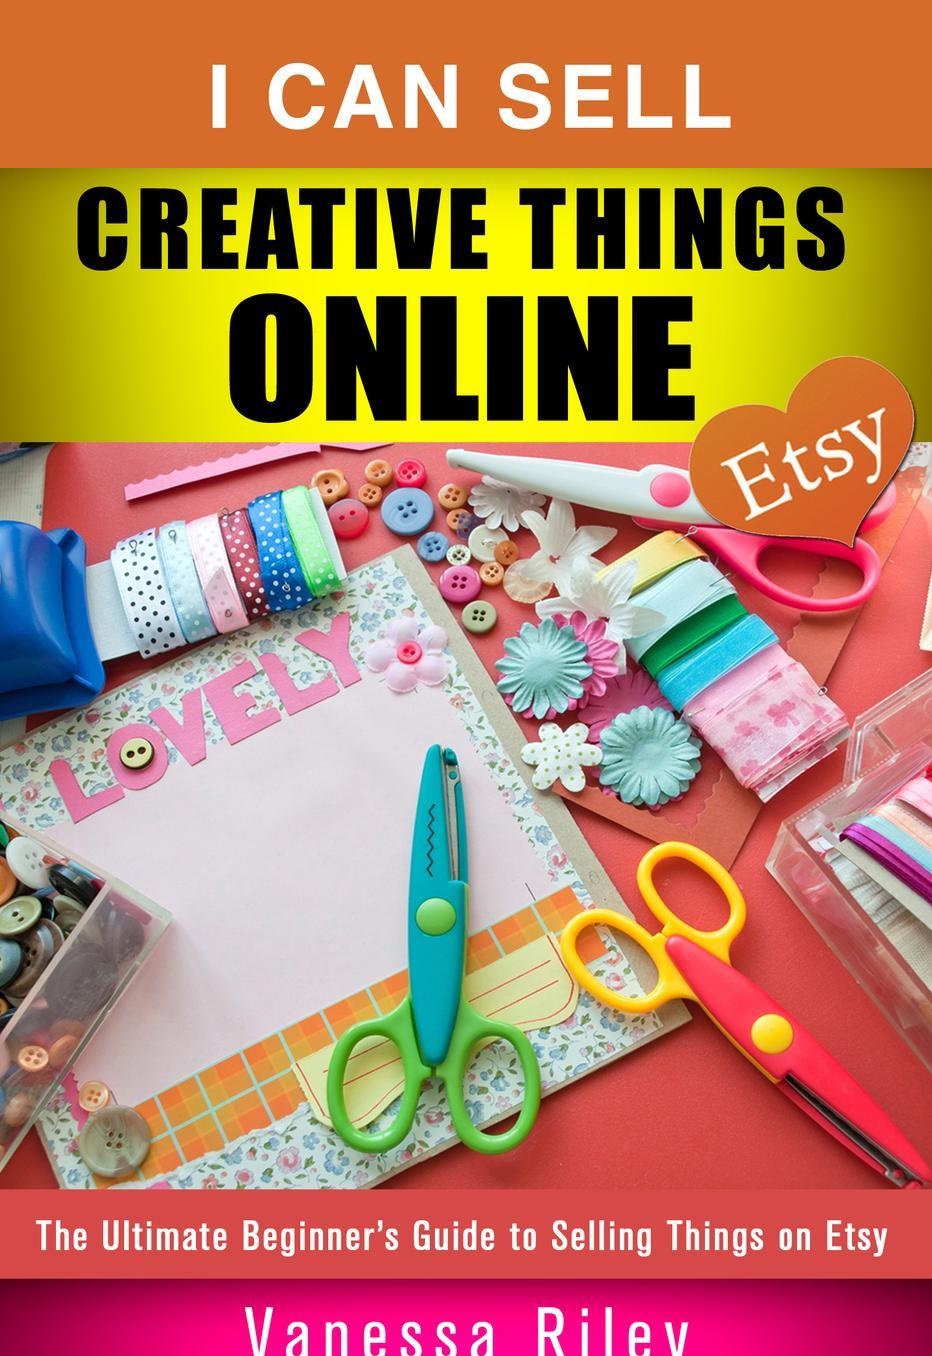 I Can Sell Creative Things Online: The Ultimate Beginner's Guide to Selling Things on Etsy